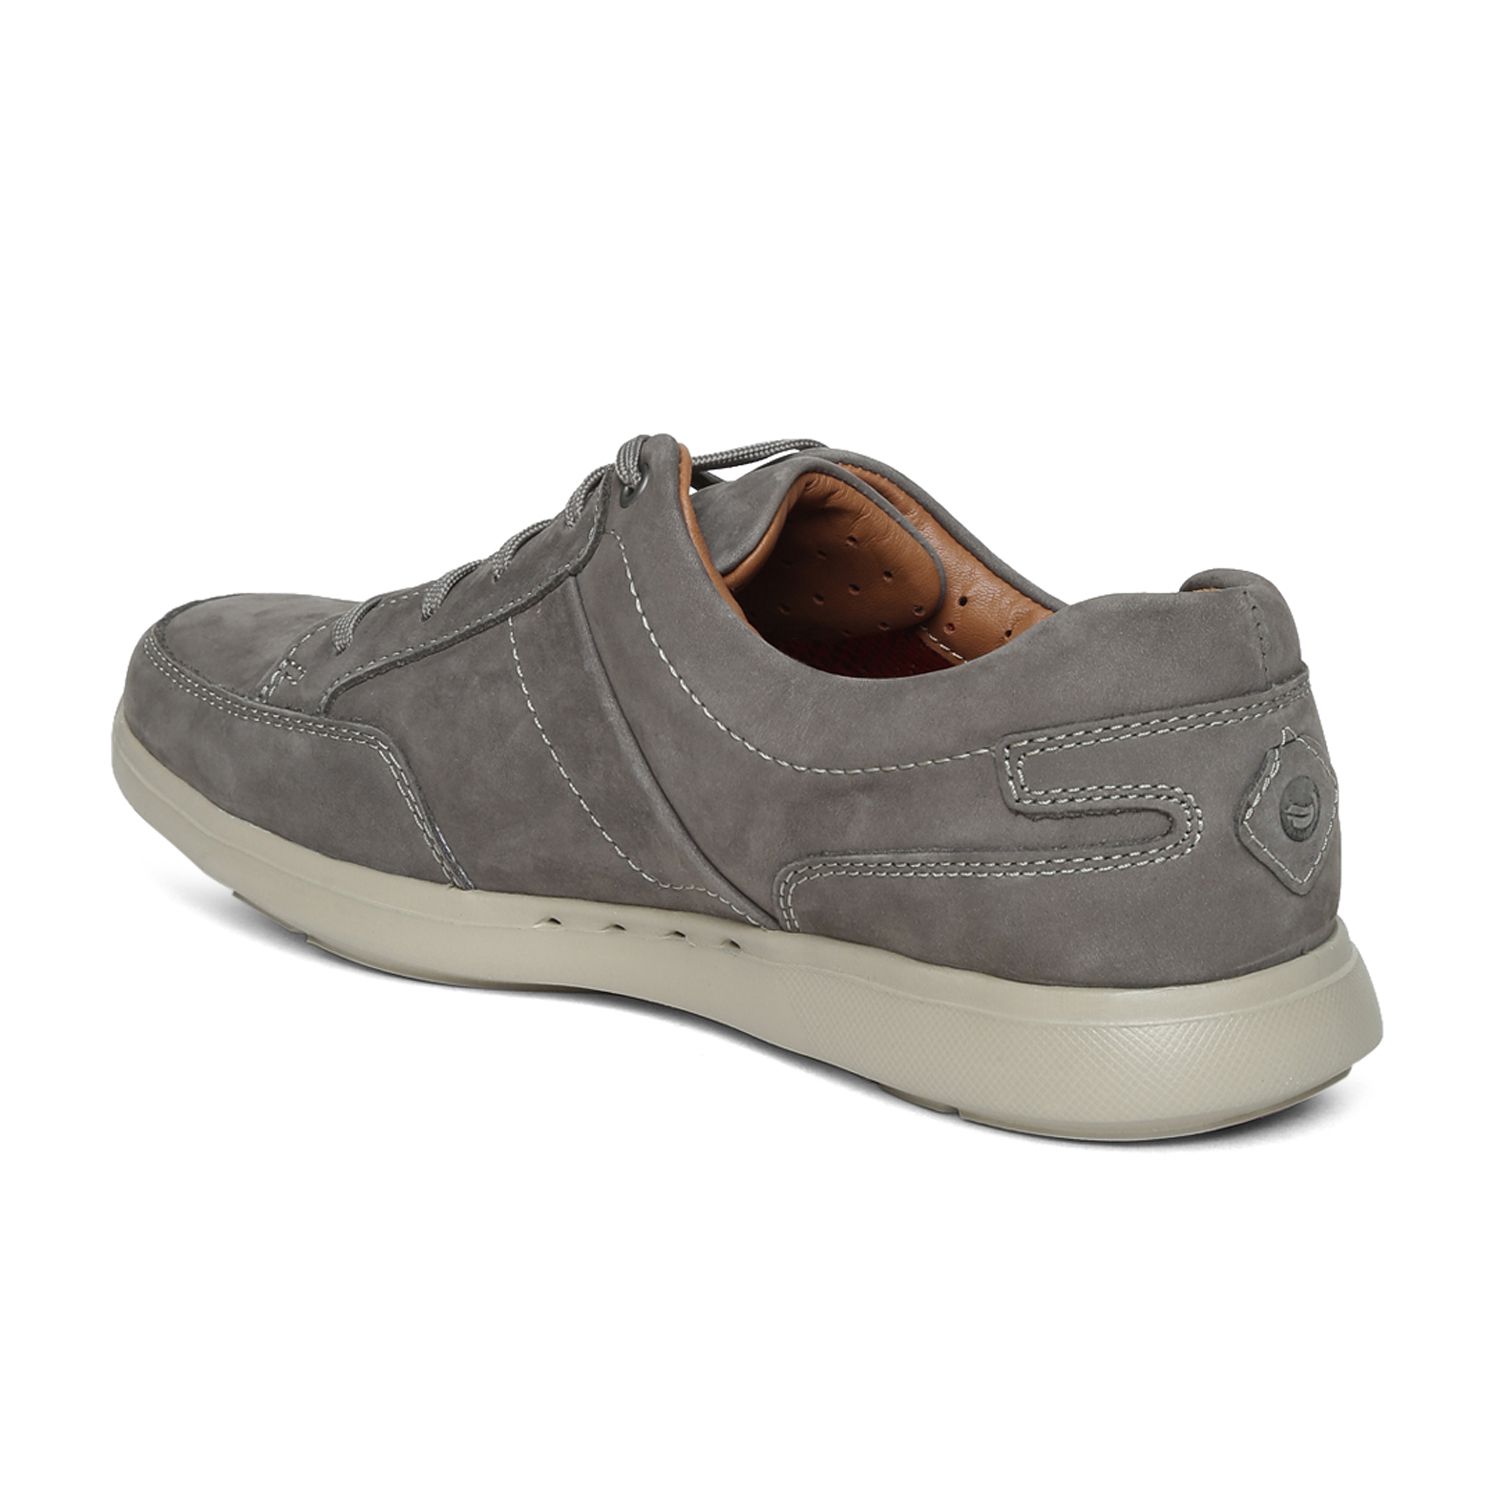 Clarks Sneakers Gray Casual Shoes - Buy Clarks Sneakers Gray Casual ...